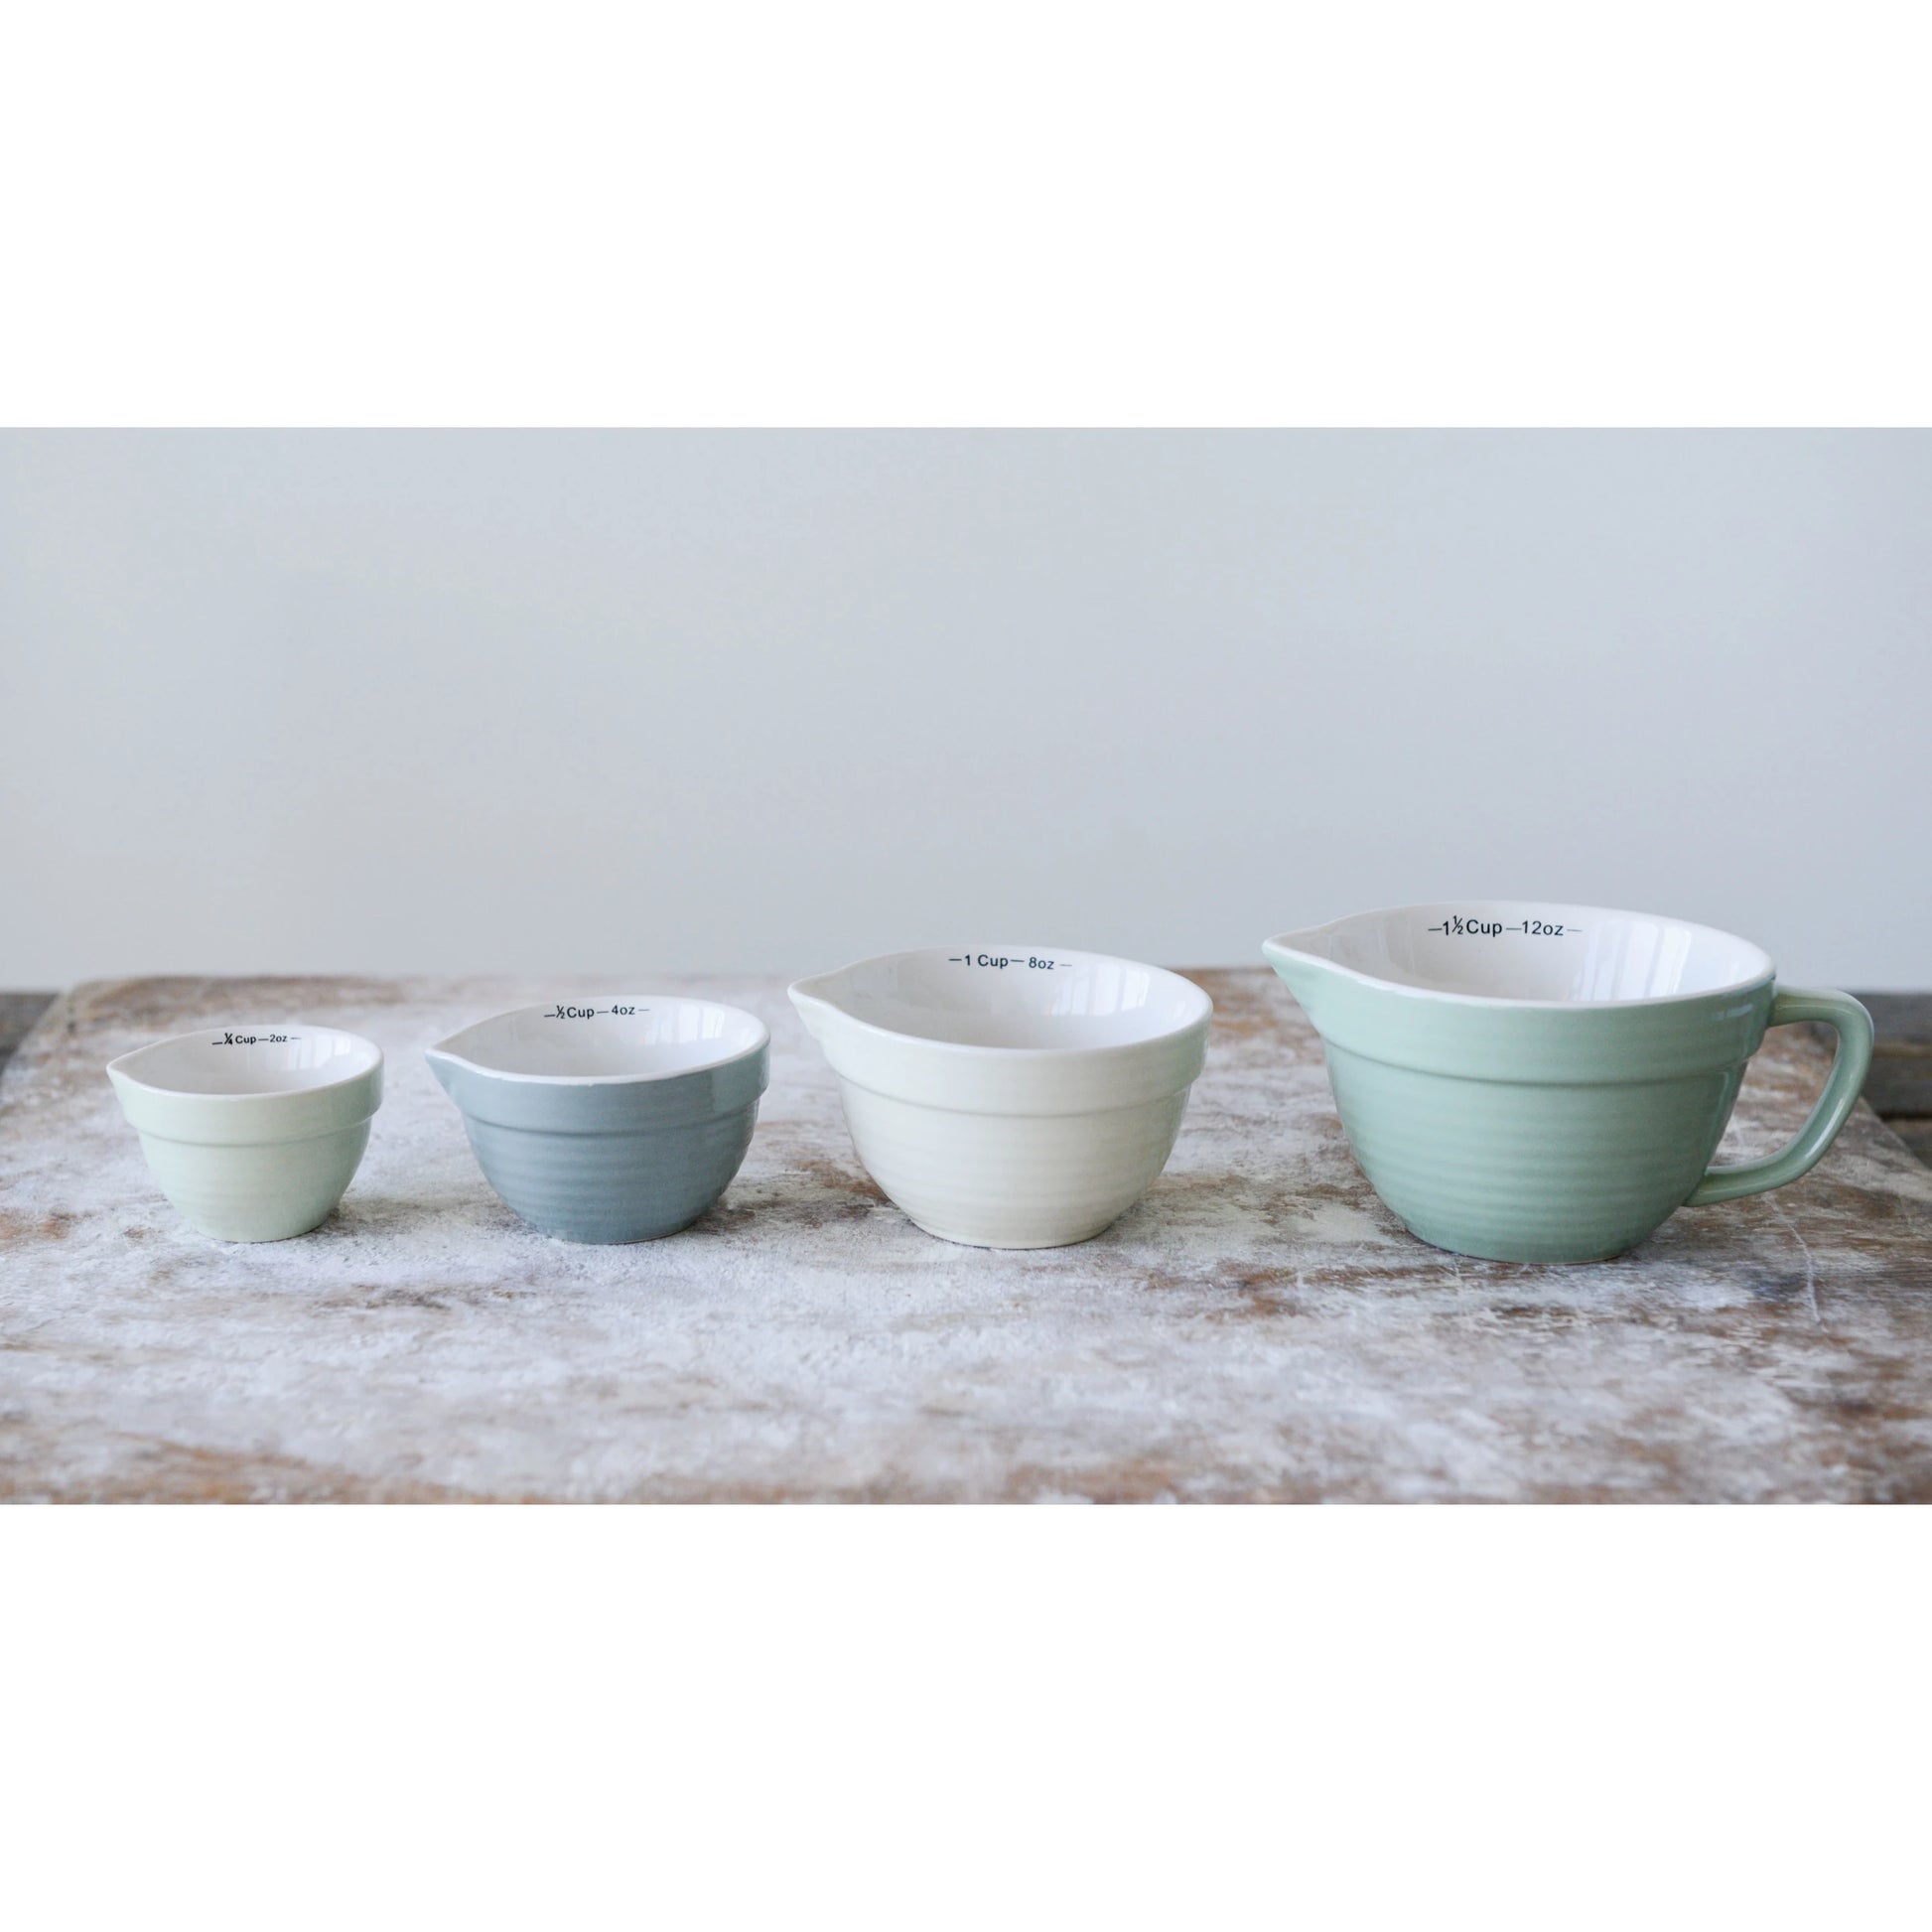 4 batter bowl shaped measuring cups in a row on a countertop dusted with flour.